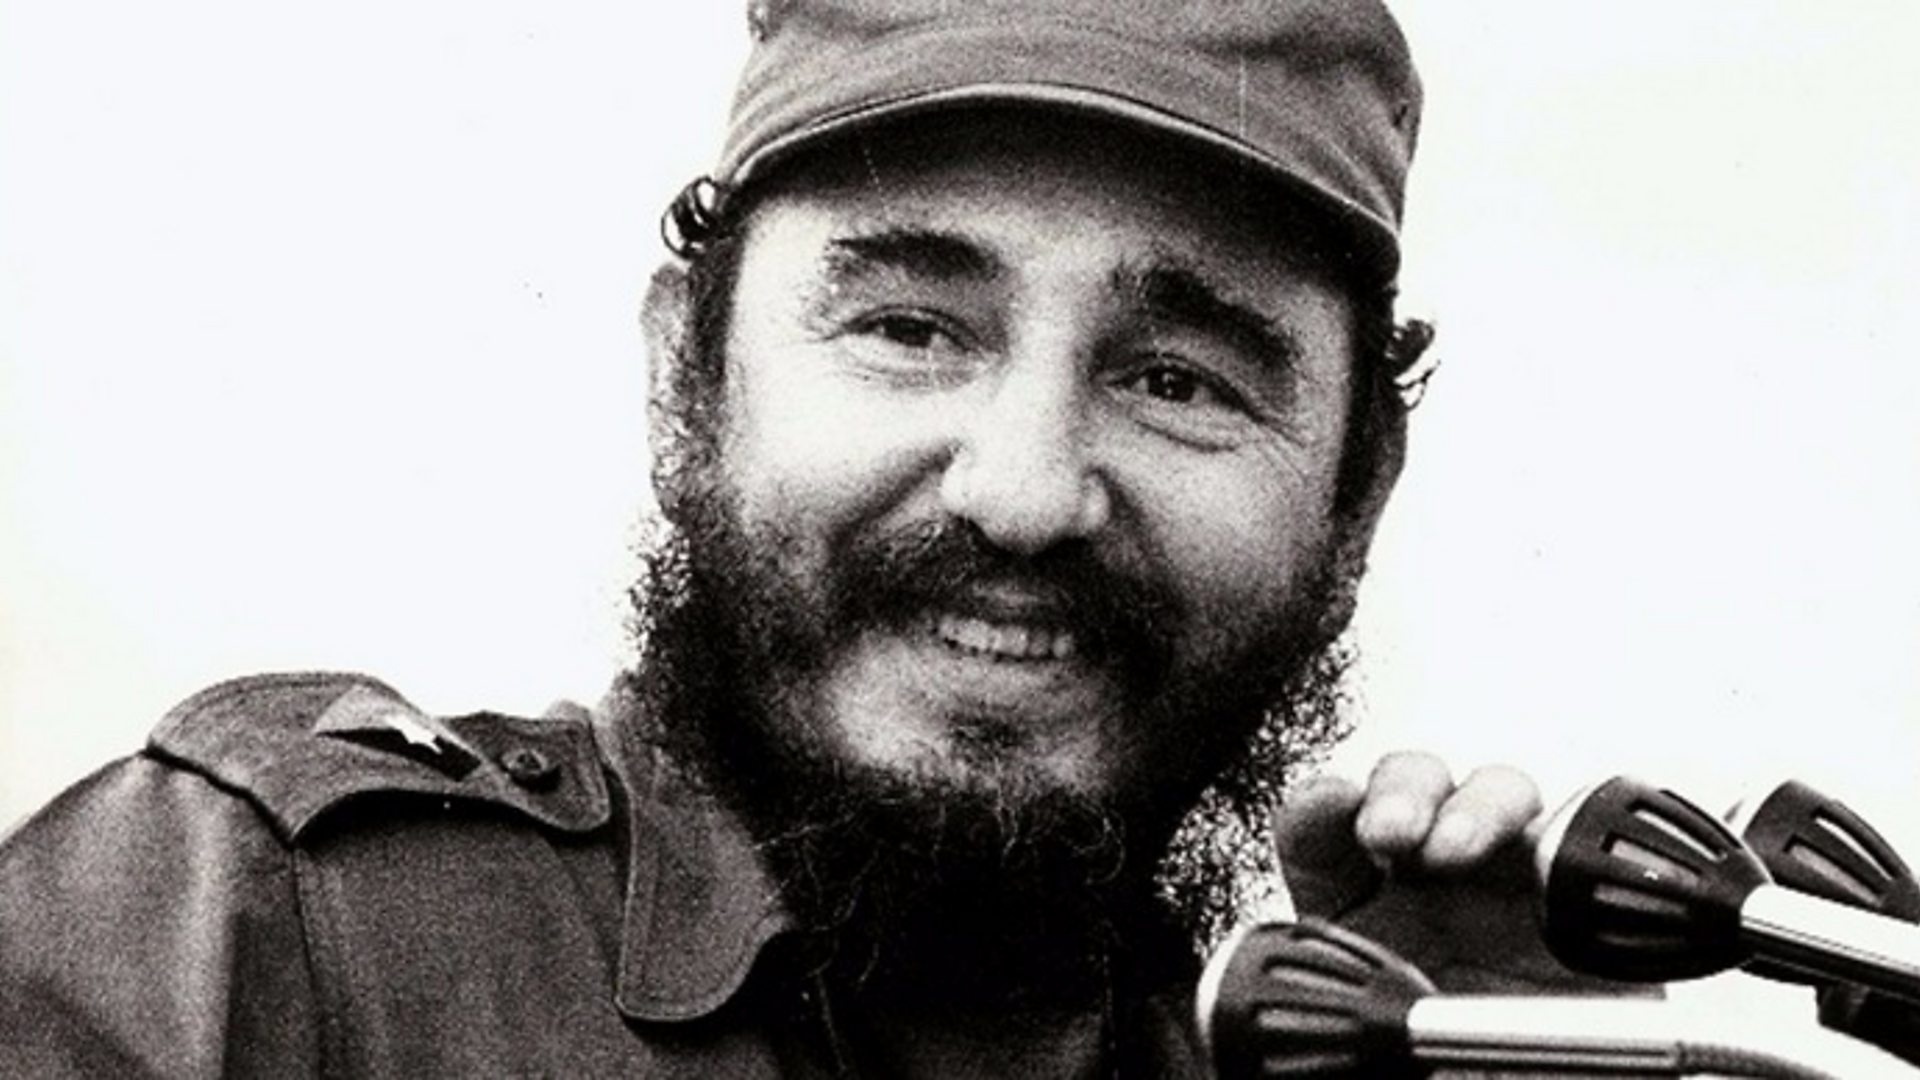 Fidel Castro: Turned Cuba into the first communist state in the Western Hemisphere. 1920x1080 Full HD Background.